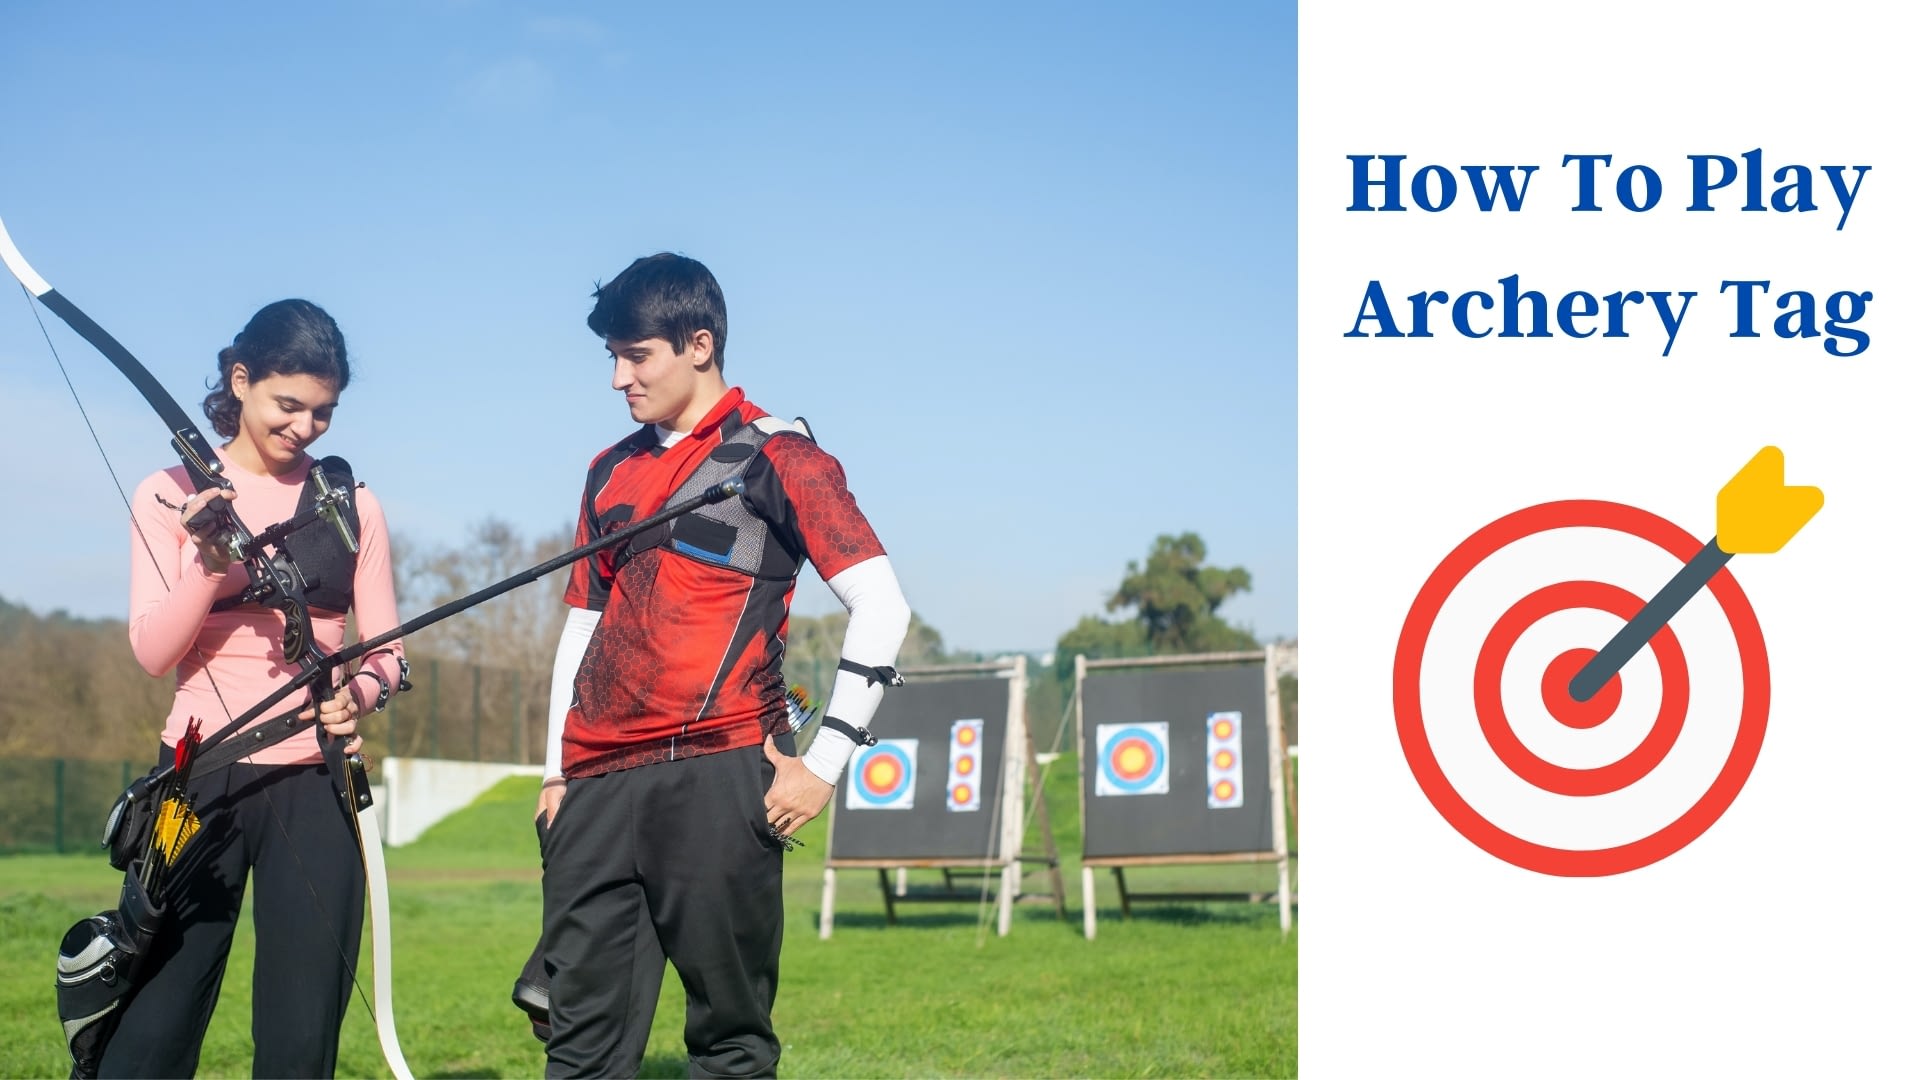 How To Play Archery Tag